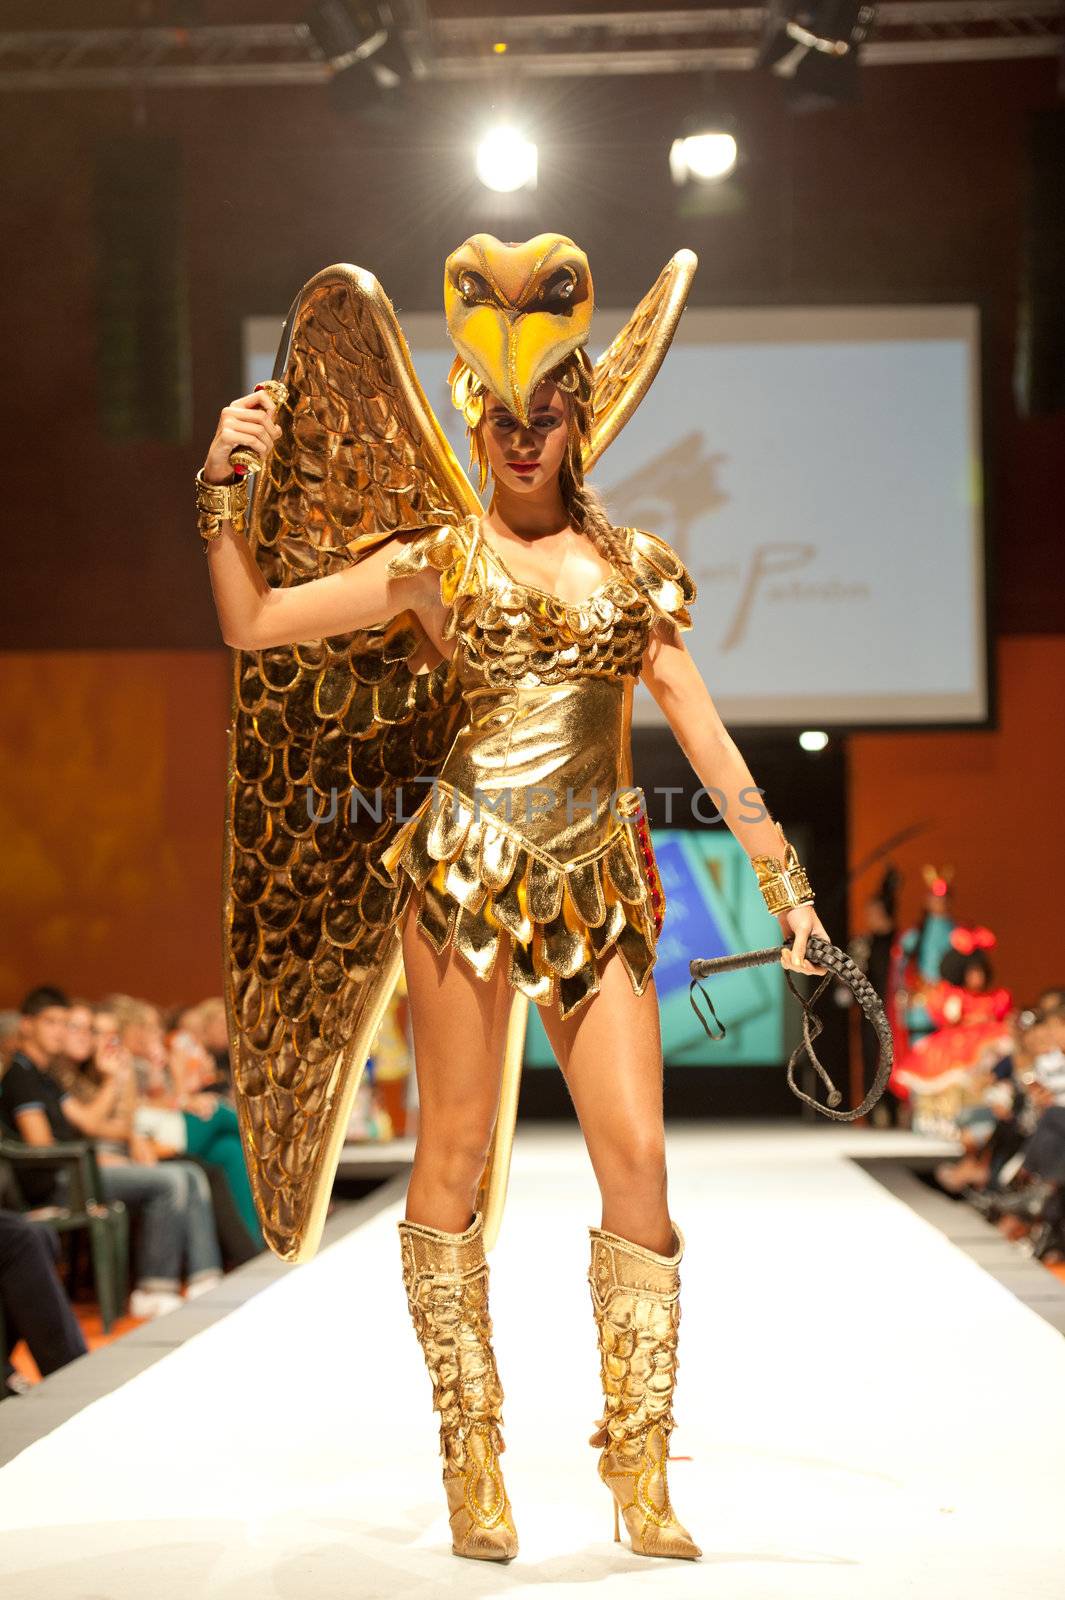 CANARY ISLANDS - 29 OCTOBER: Model on the catwalk wearing carnival costume from designer Mari Patron Dominguez during Carnival Fashion Week October 29, 2011 in Canary Islands, Spain